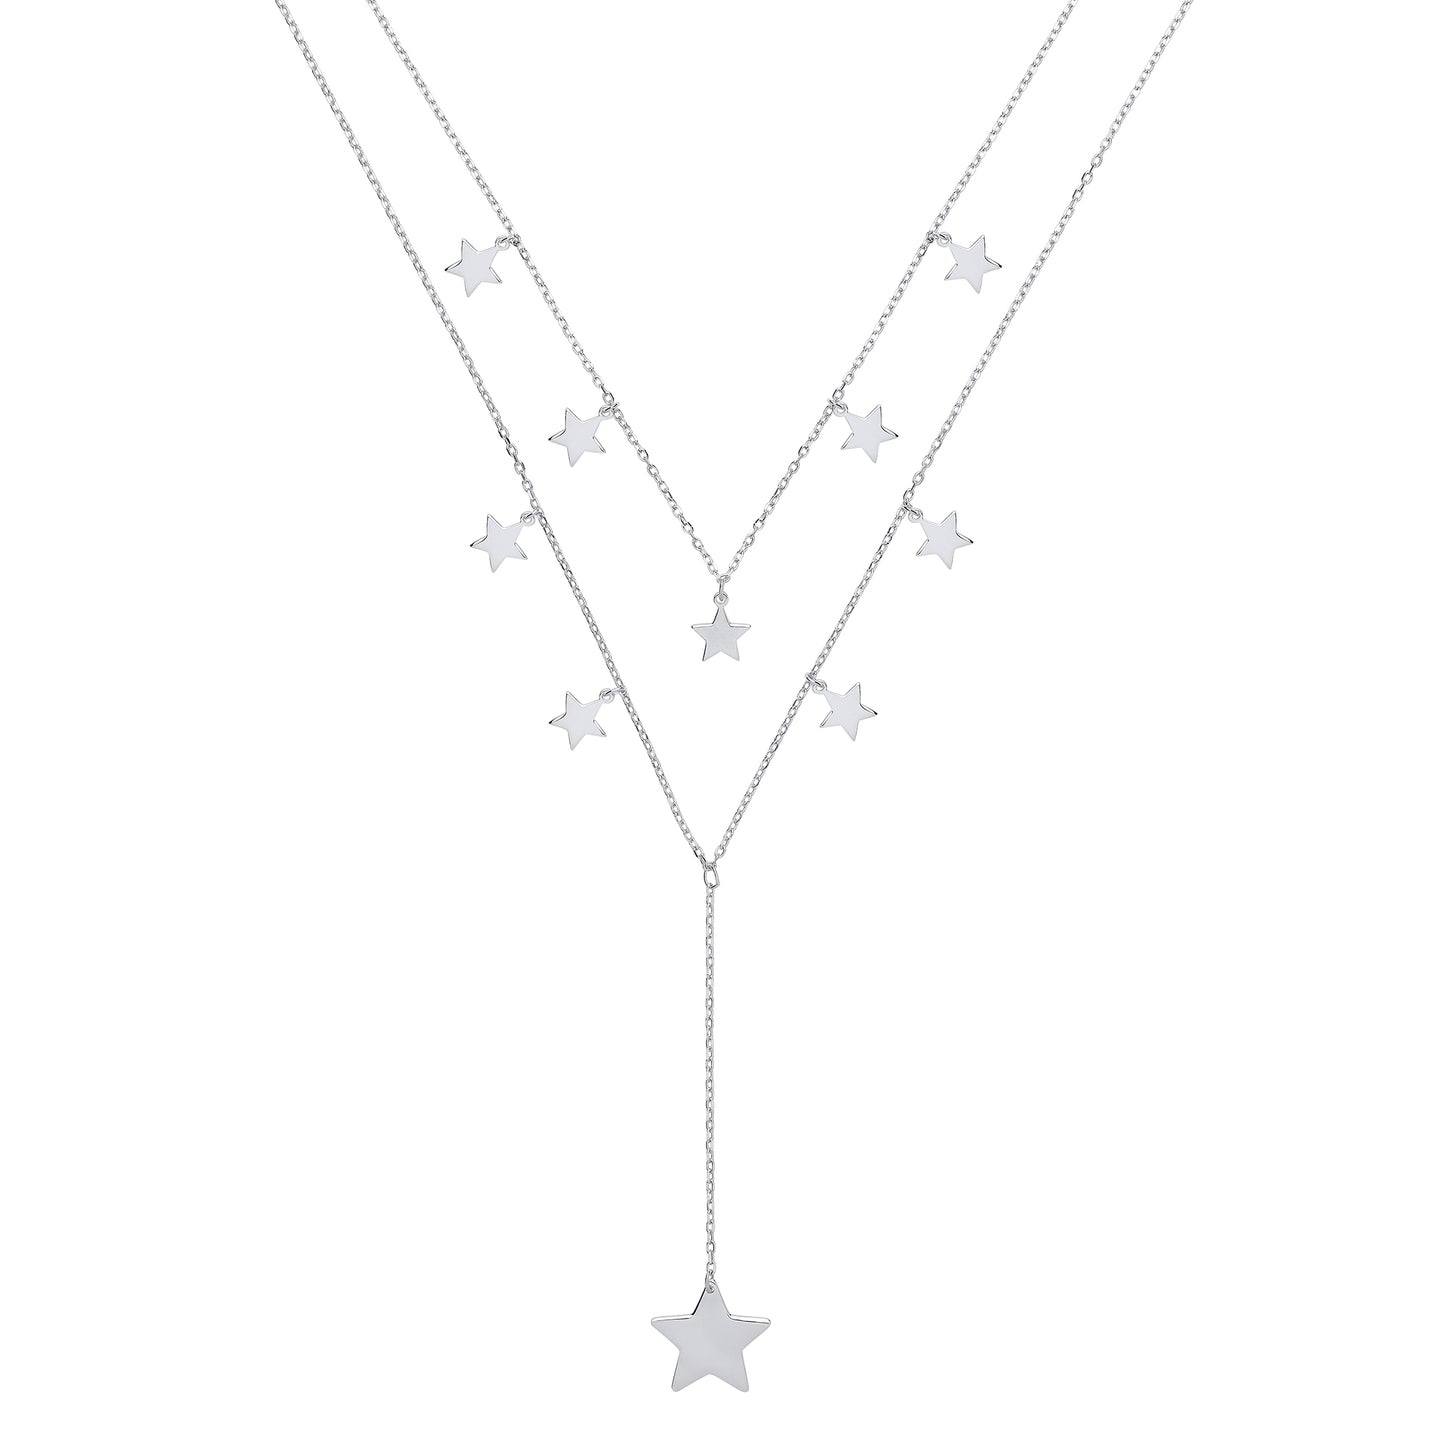 Silver  Galaxy Star Cluster Charm Necklace 16 inch - GVK279